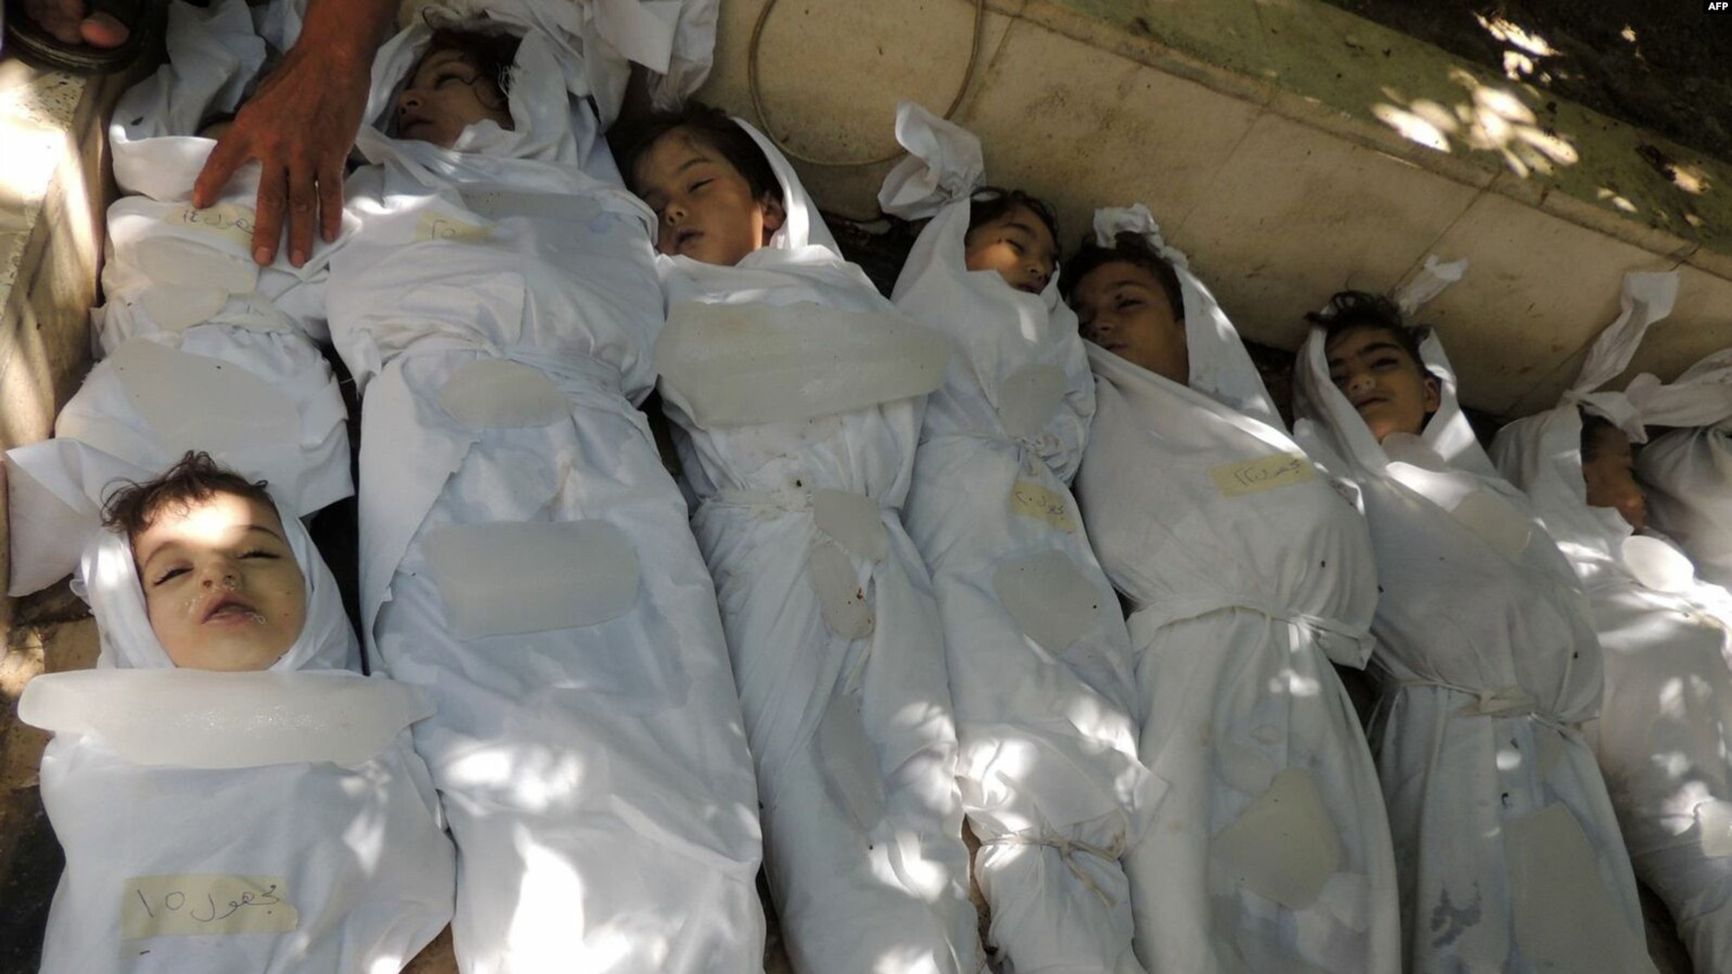 Syrian children killed in airstrike involving chemical weapons in Damascus suburbs